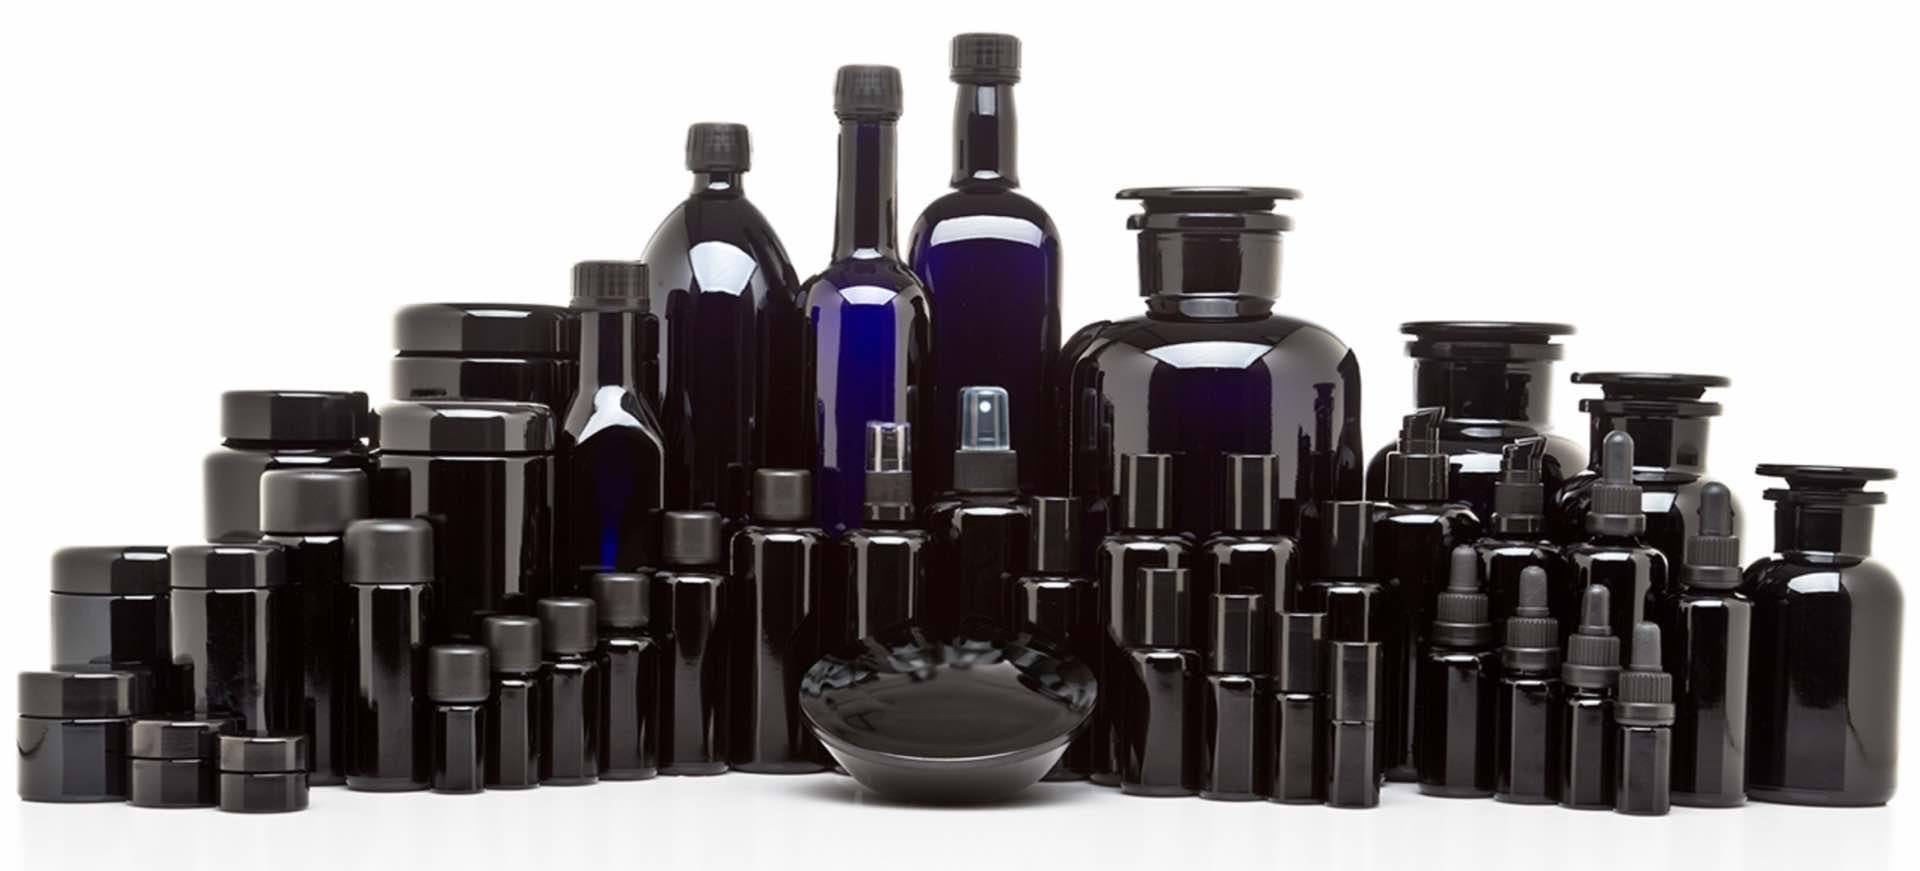 infinity-jars-ultraviolet-glass-jars-bottles-containers-collection